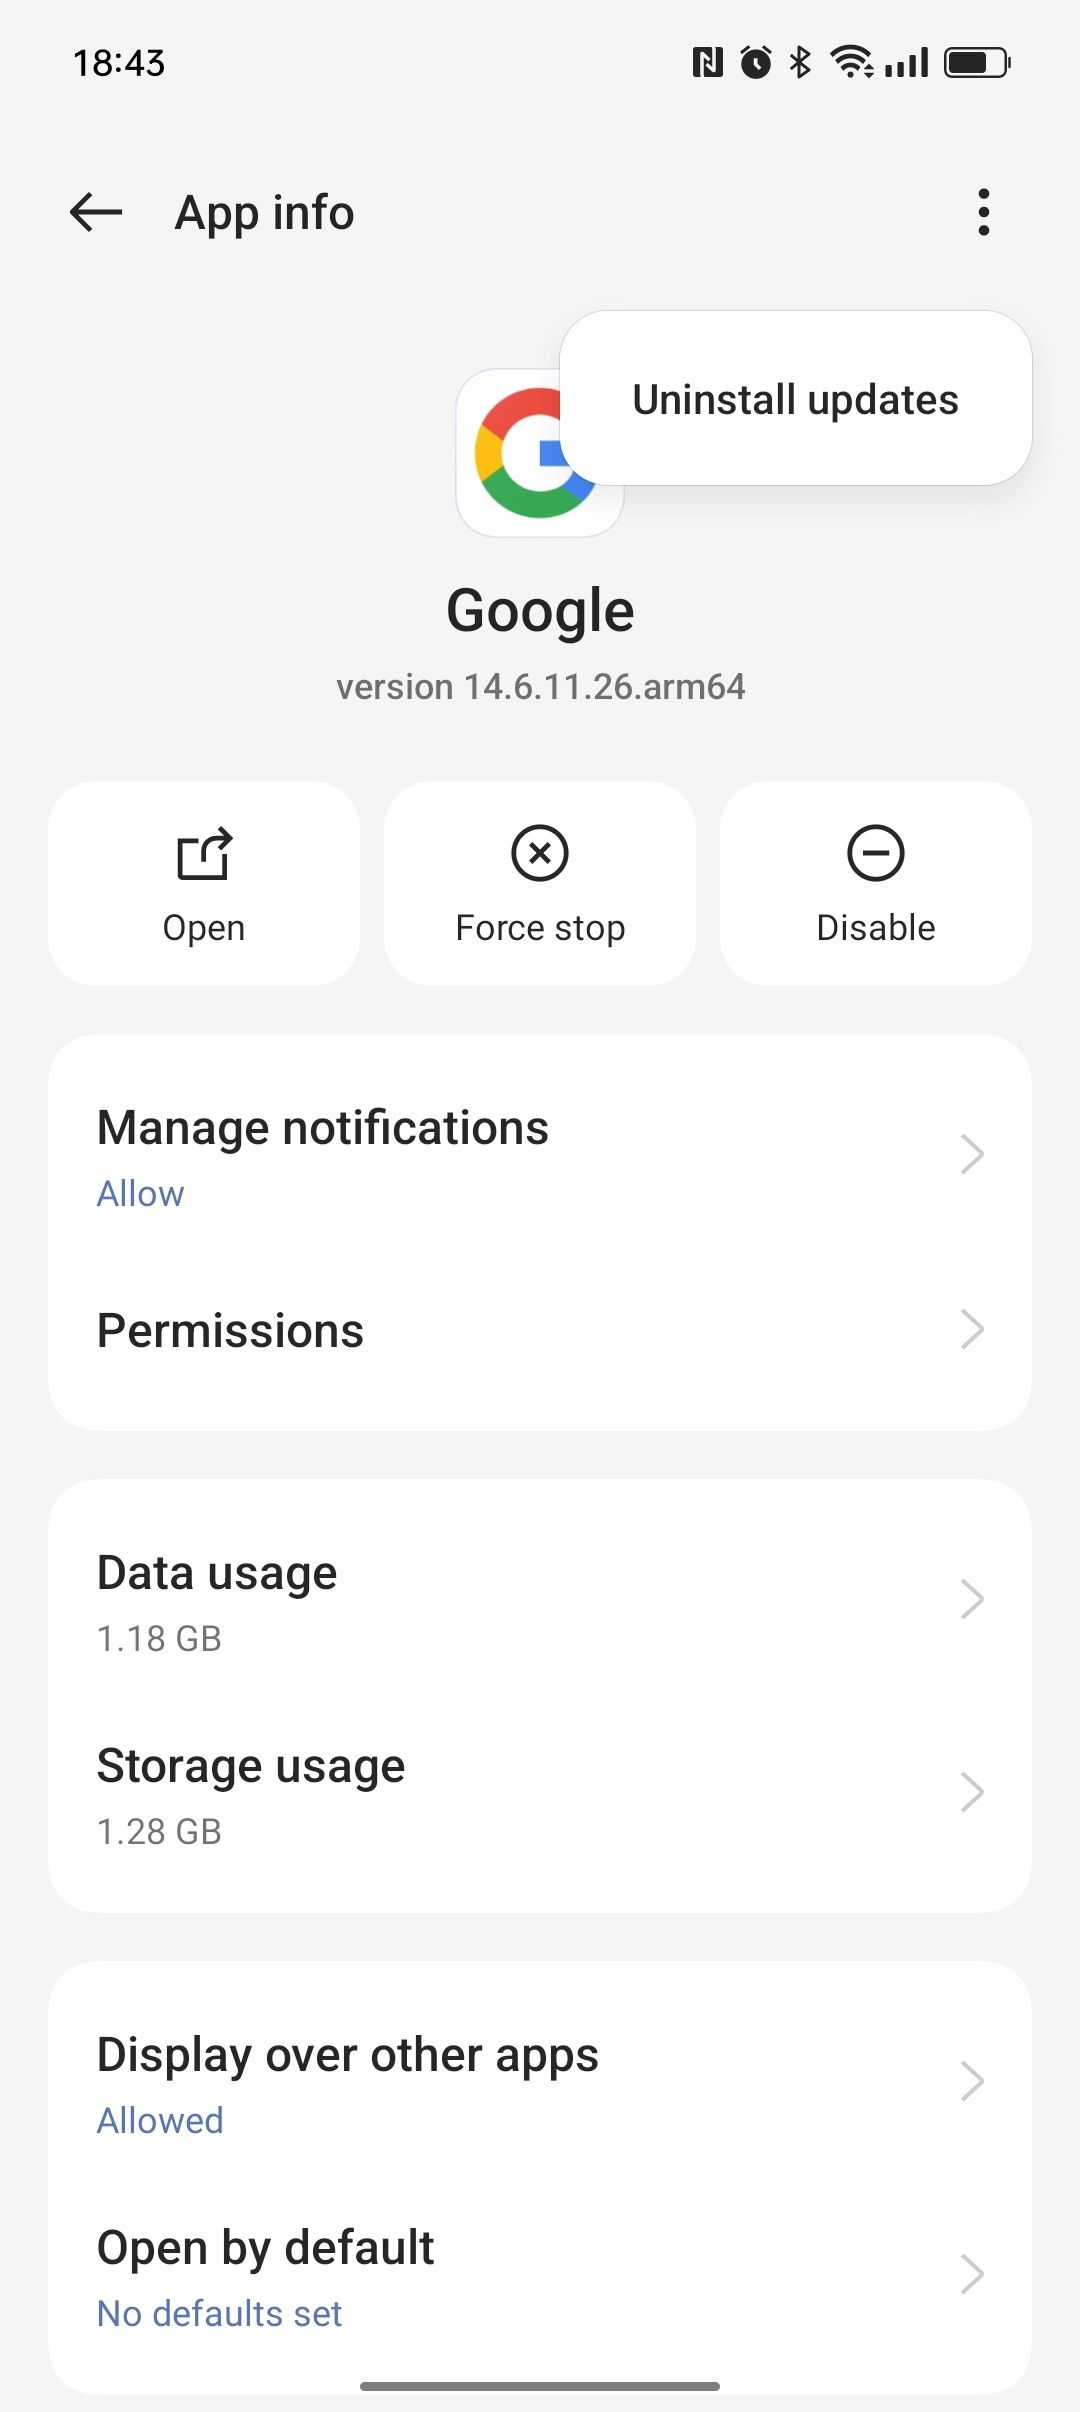 Uninstall Android app updates